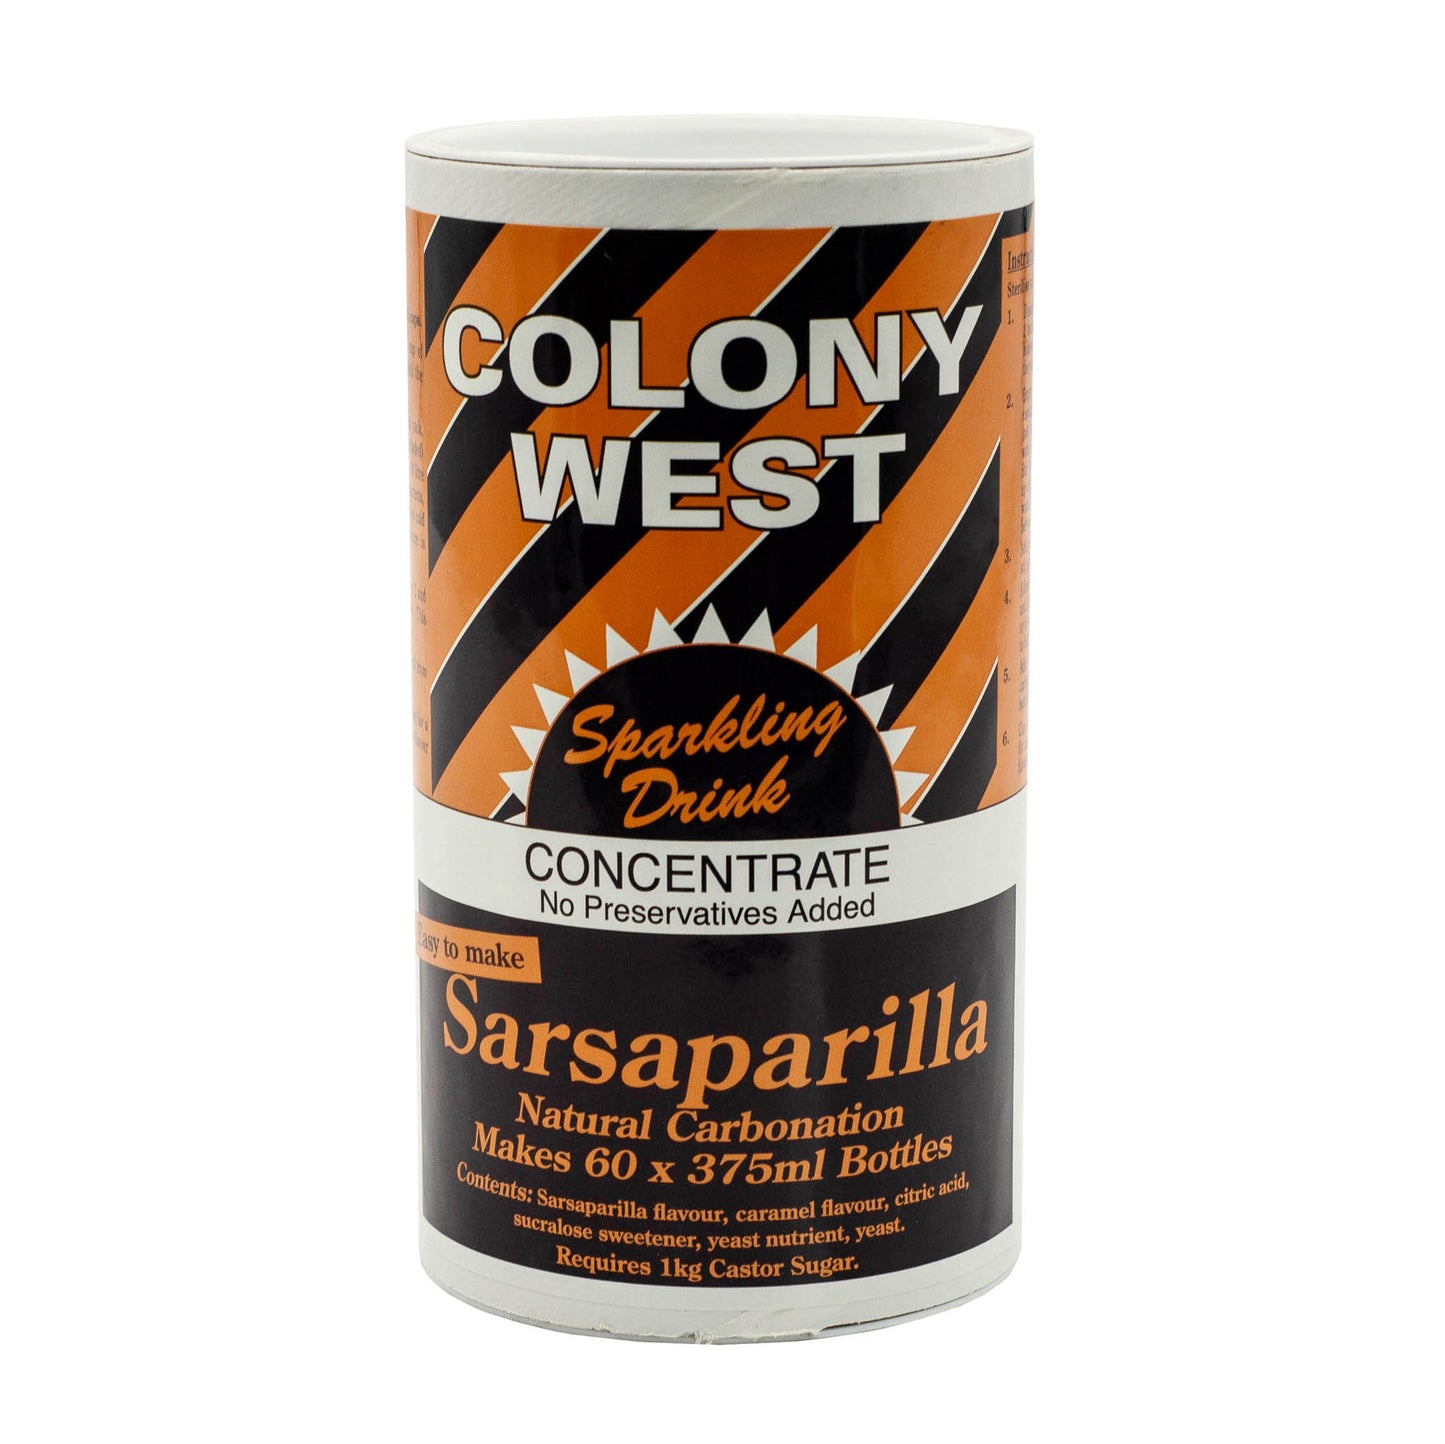 Colony west sarsaparilla concentrated brew tin. Makes up to 23 litres. 